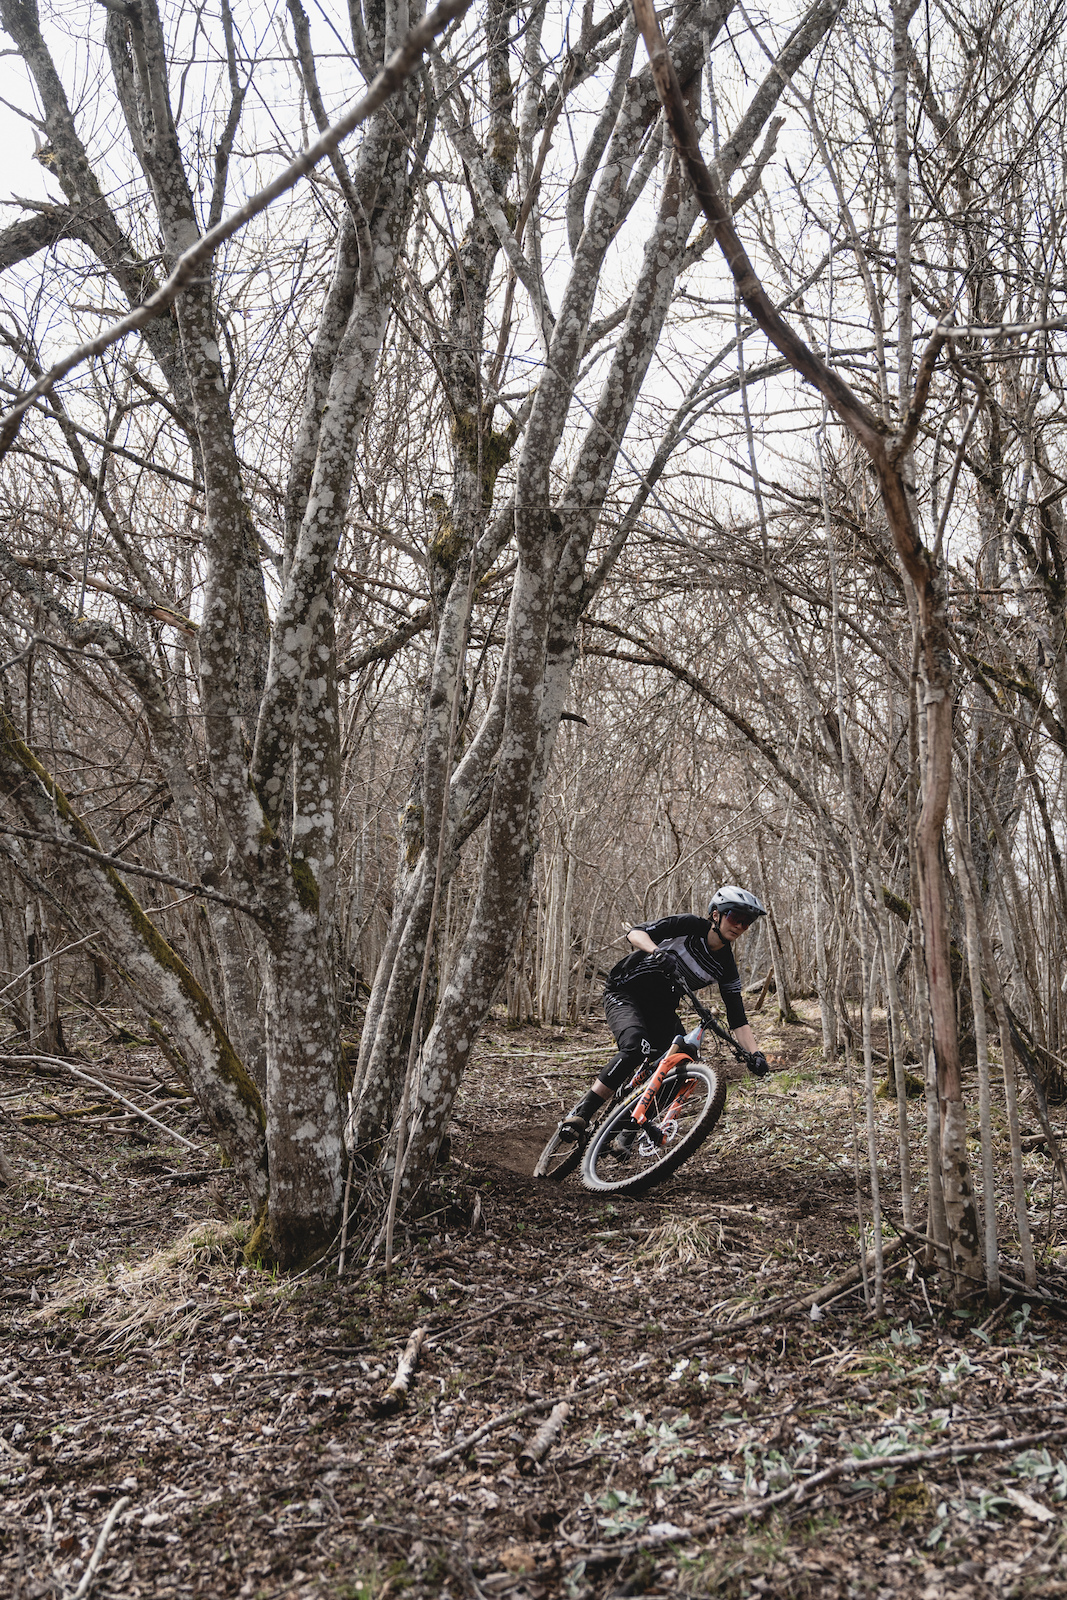 Take A Lap with Laura Charles
Orbea Enduro Team